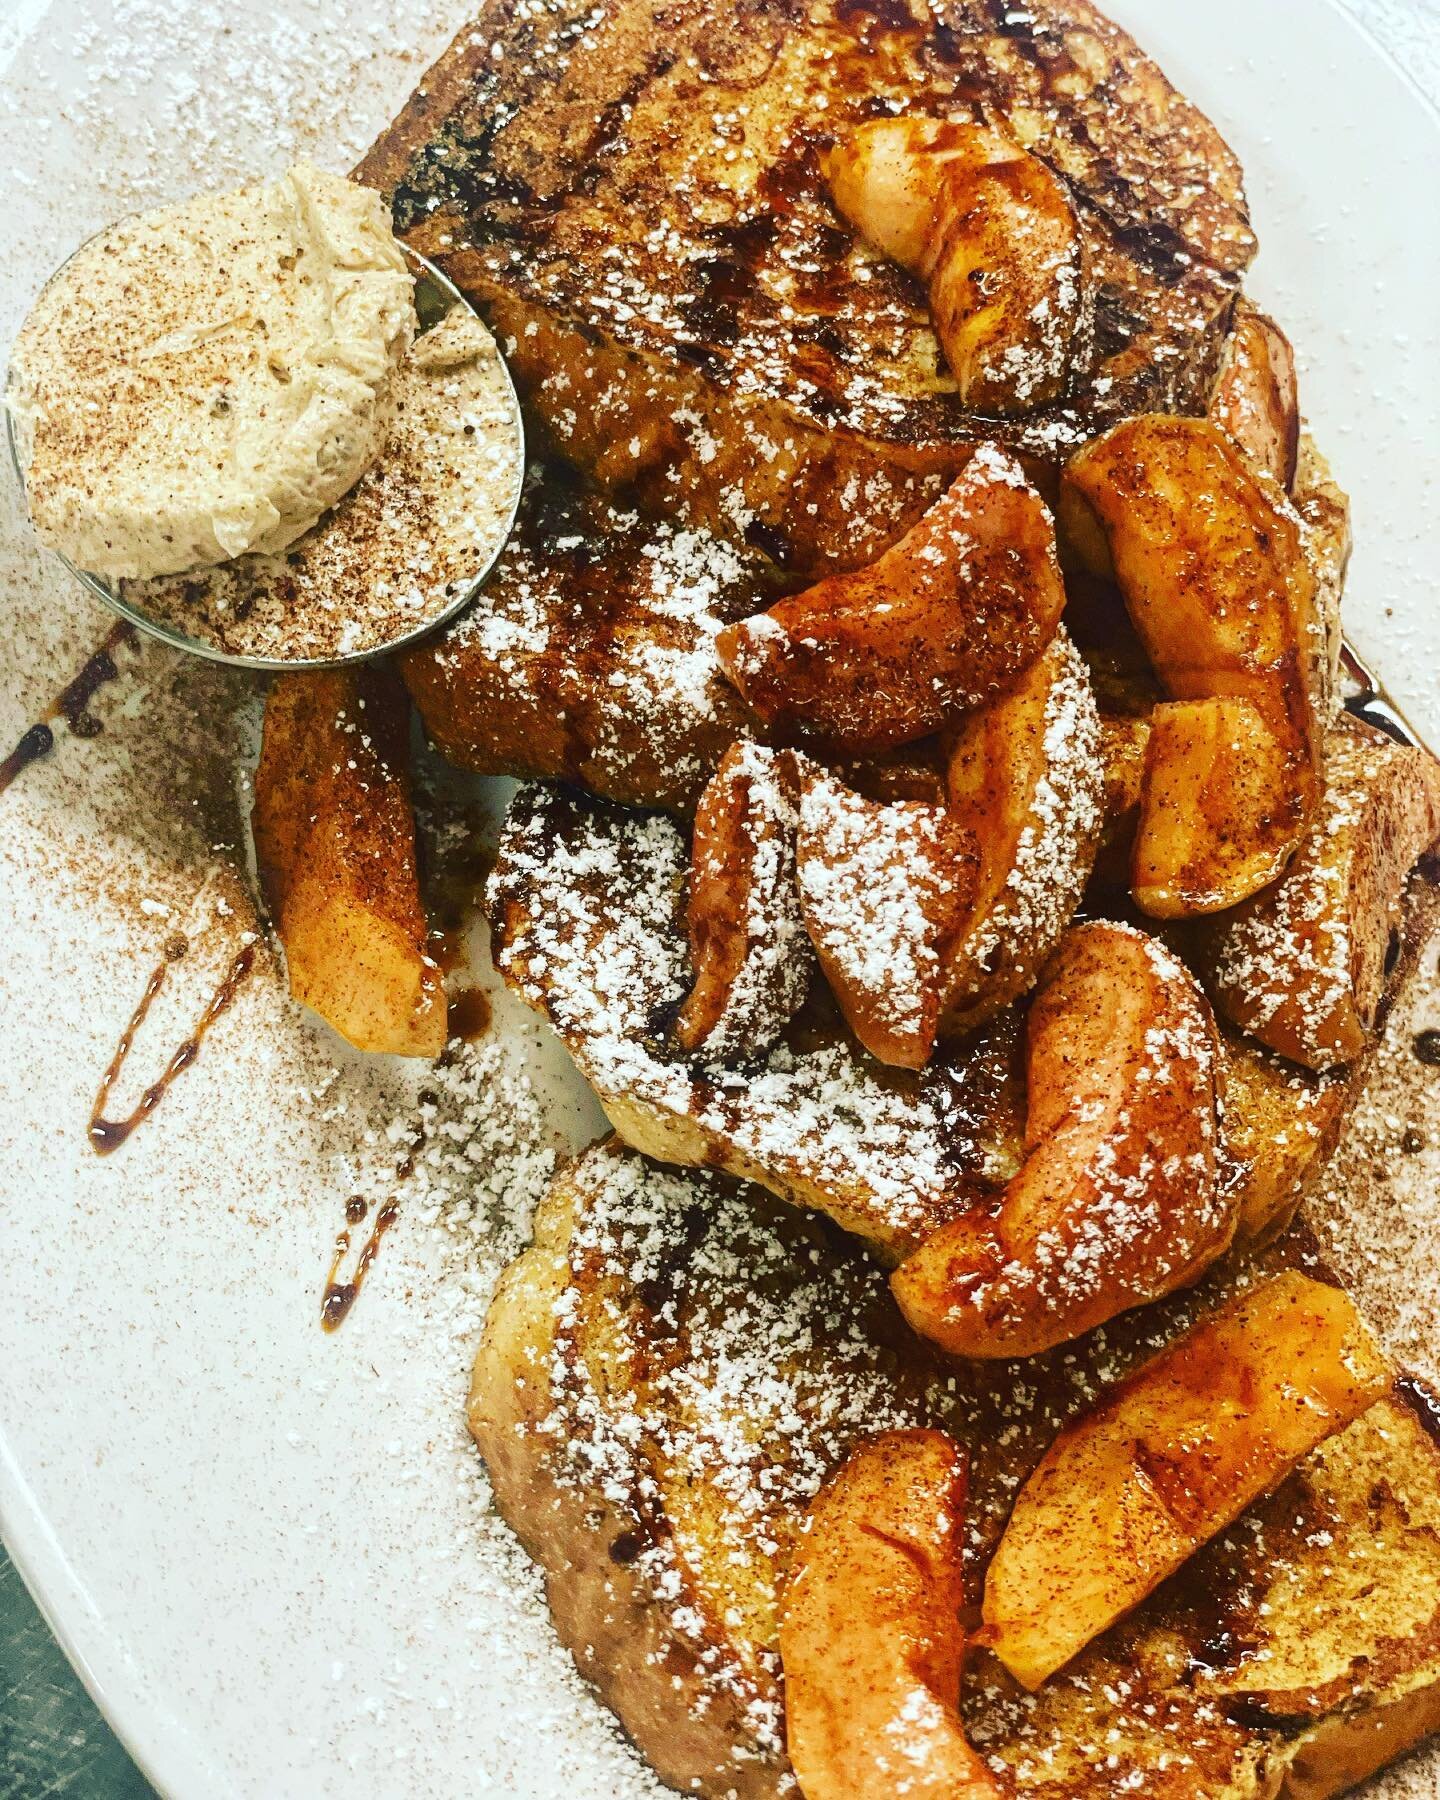 Our Pumpkin spice French toast with apples and  maple spice butter was a huge hit this weekend! Thanks for coming and celebrating the first day of fall here in the Catskills @sweetsuesphoenicia. 

We look forward to seeing you again next week during 